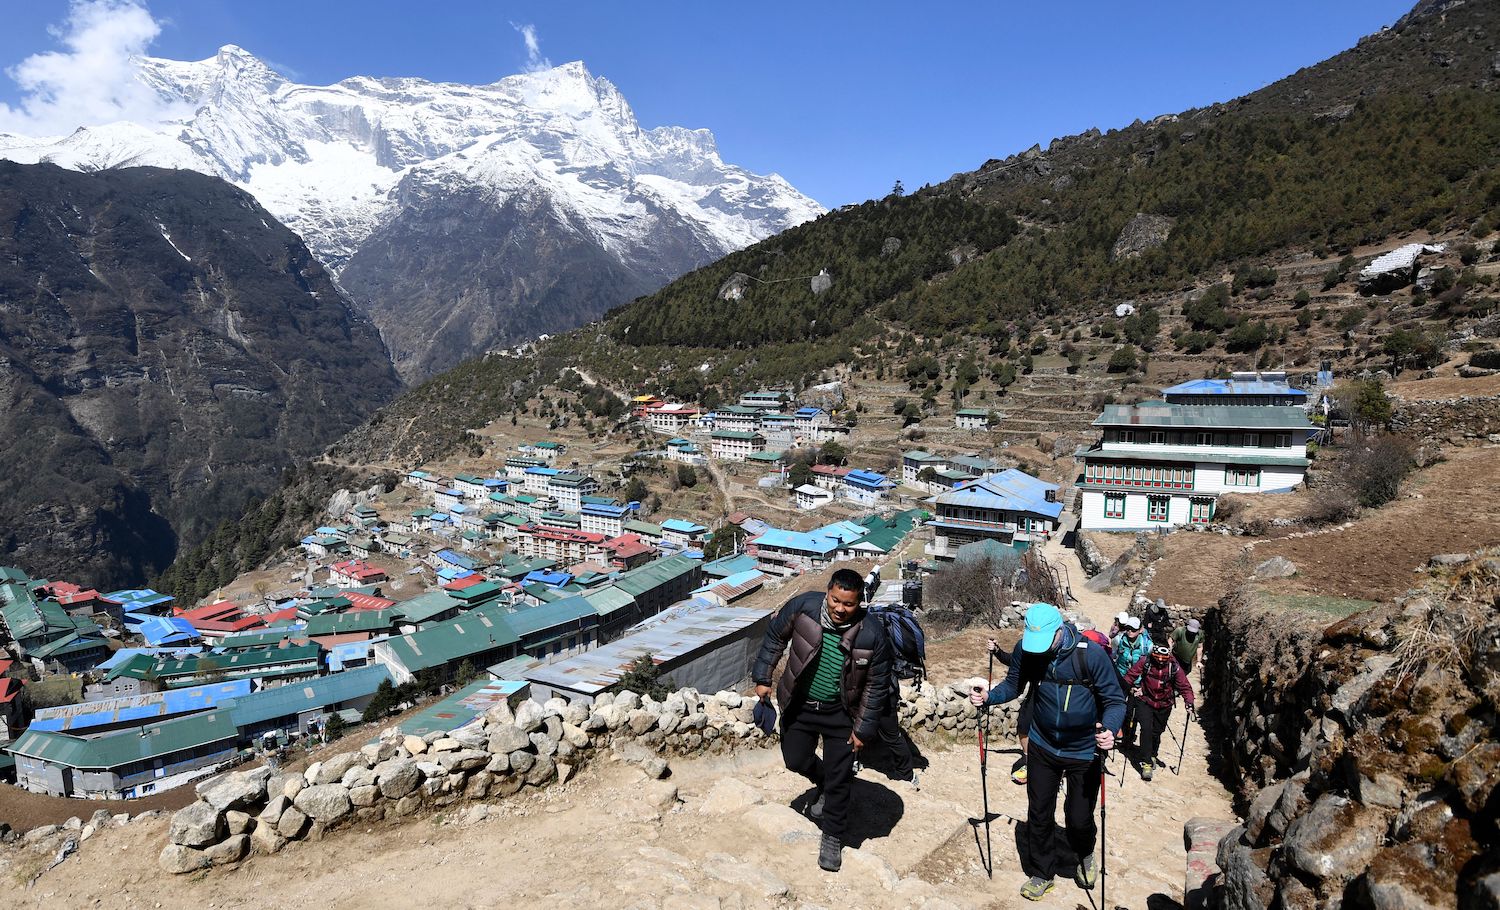 Trekkers walk along a path at Namche Bazar town in the Everest region of Solukhumbu district on April 25, 2021. (Photo by PRAKASH MATHEMA / AFP) (Photo by PRAKASH MATHEMA/AFP via Getty Images)